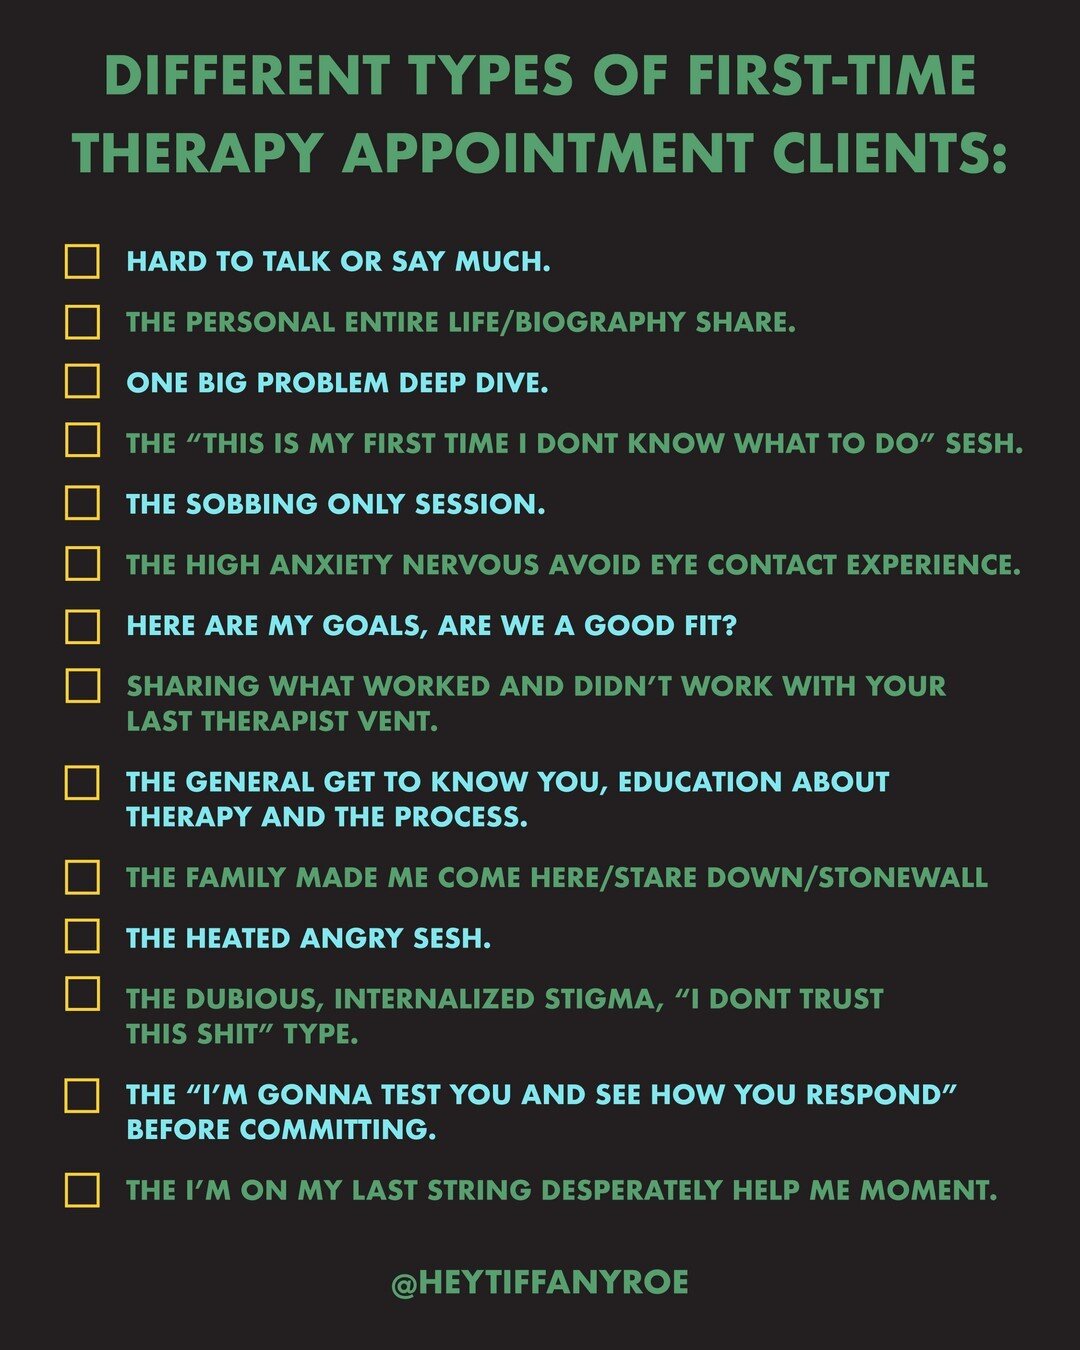 Heading into your first therapy session? Do you relate to any of these? Therapy looks different for everyone. There really is no right or wrong way to experience that first session. ⠀⠀⠀⠀⠀⠀⠀⠀⠀
⠀⠀⠀⠀⠀⠀⠀⠀⠀
The most important thing: being able to trust, v